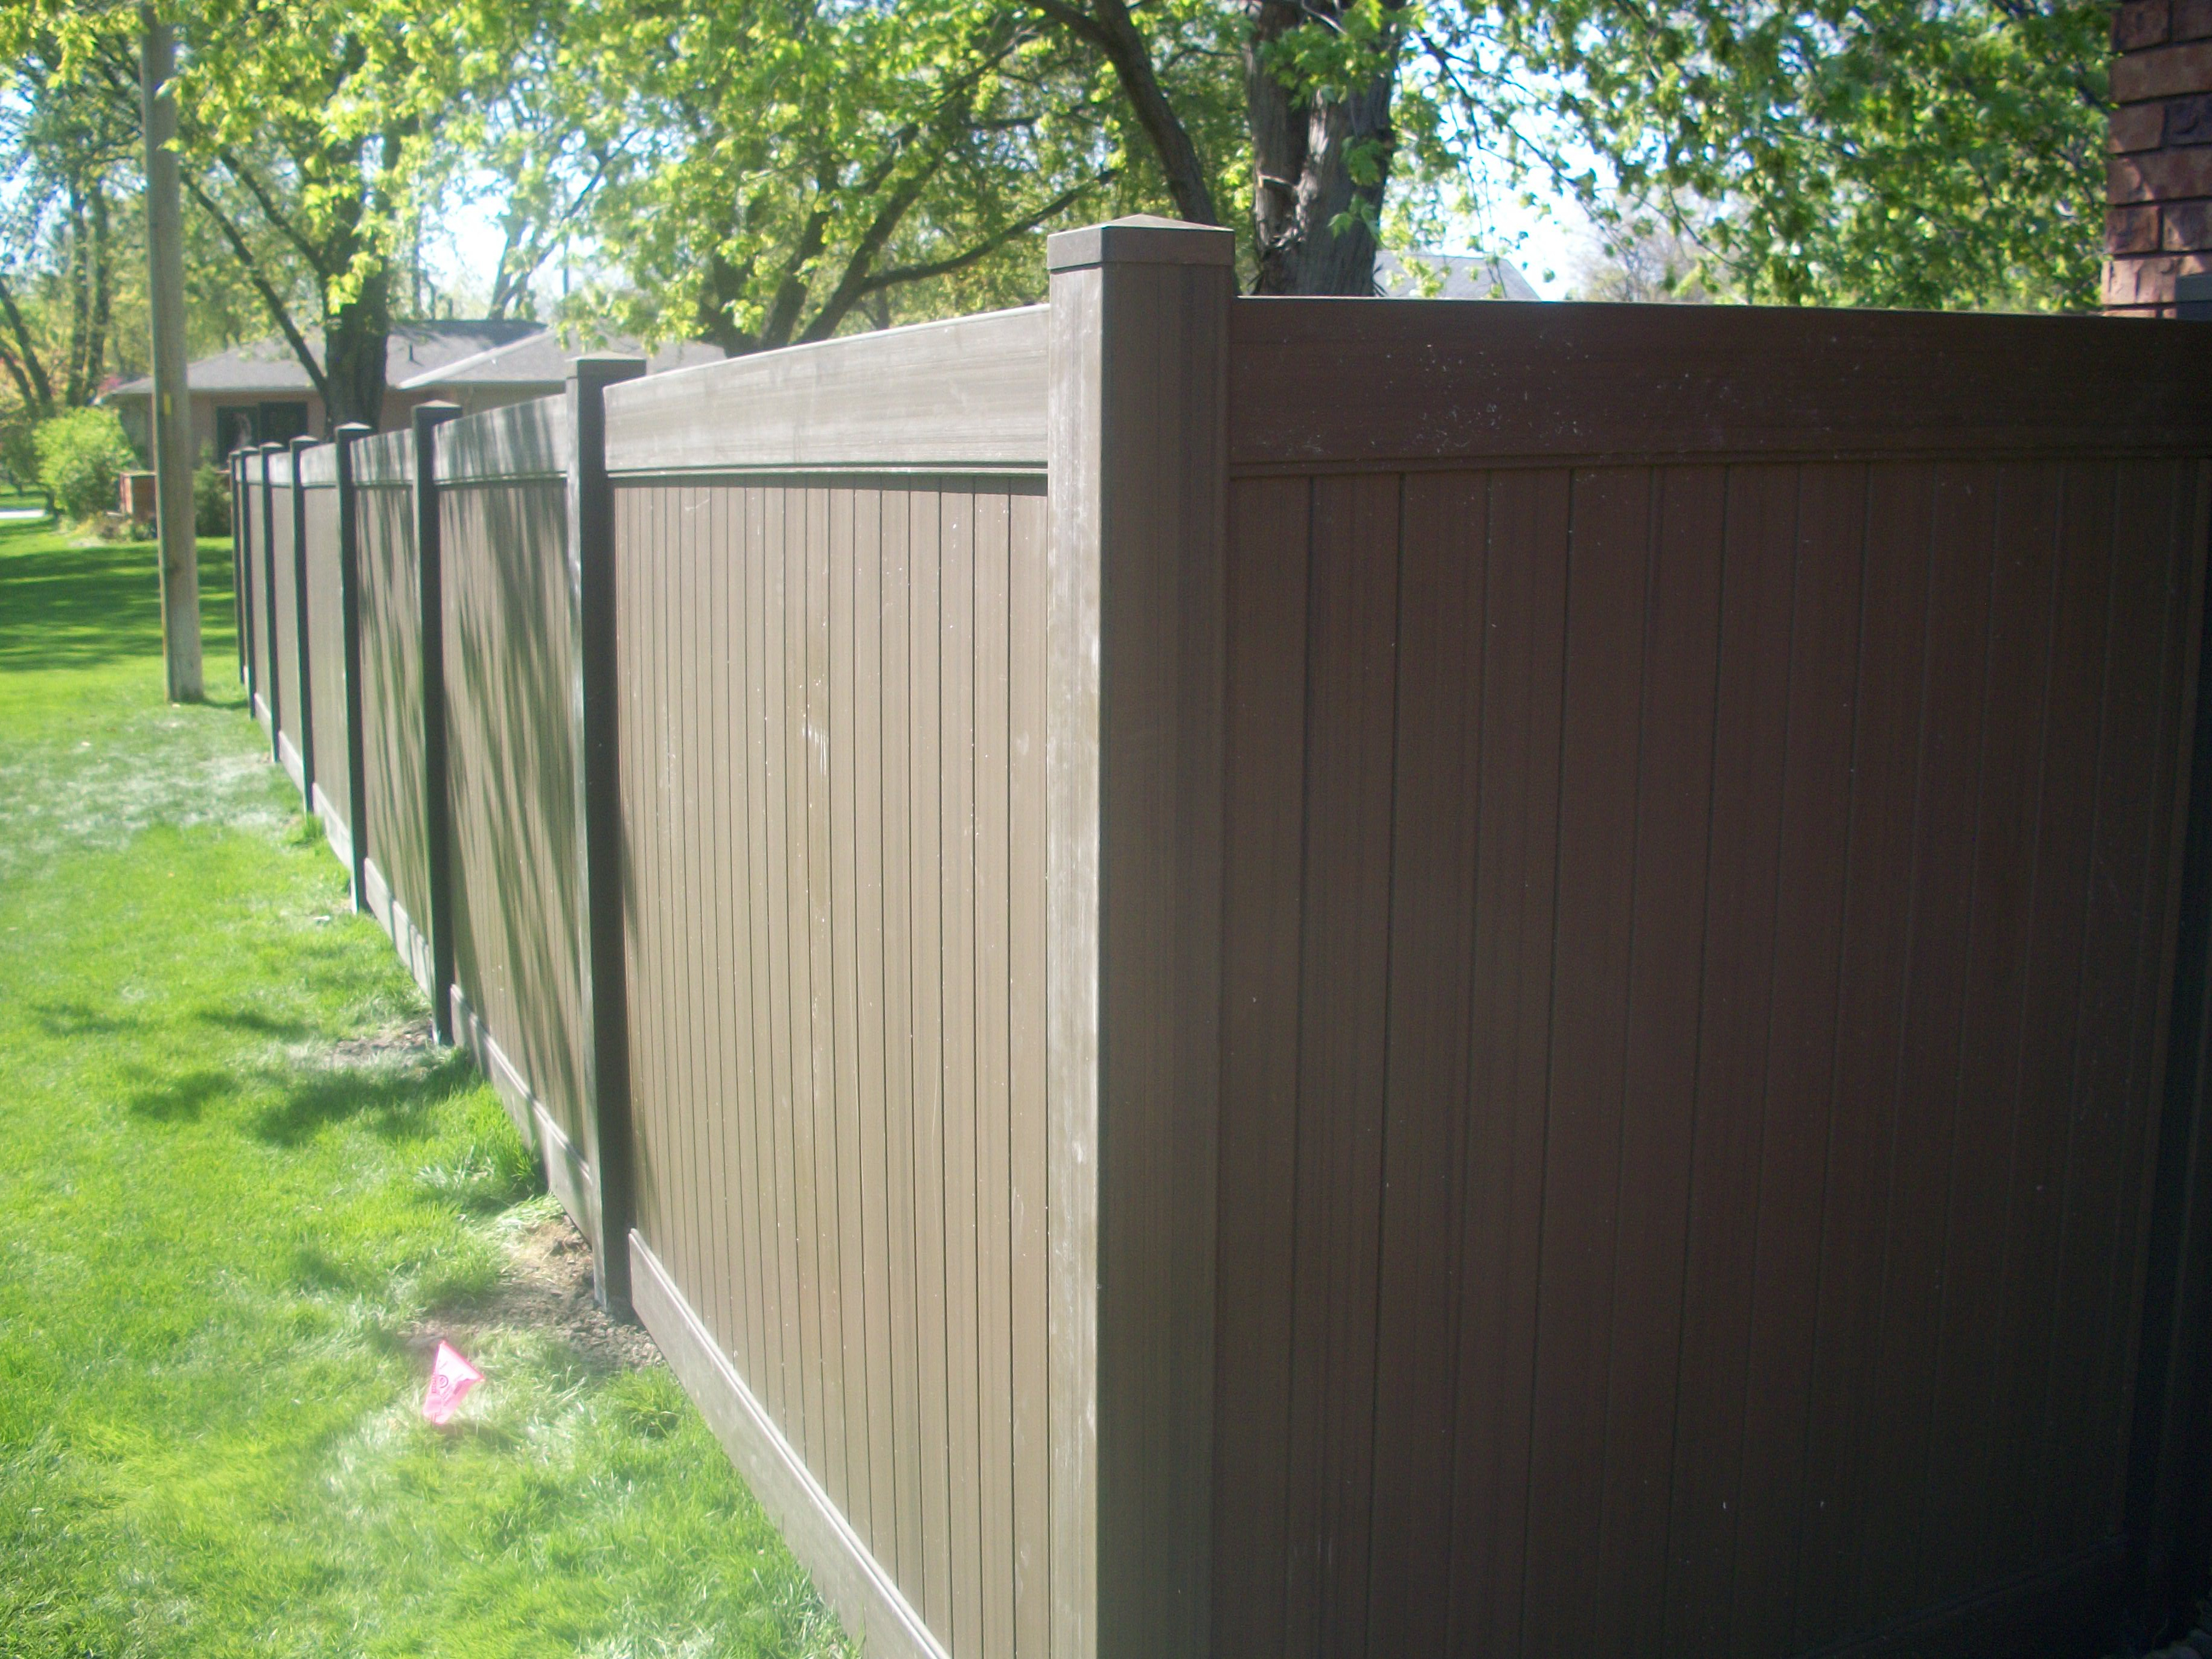 Chestnut Brown Vinyl Fence Special The American Fence Company inside dimensions 3664 X 2748